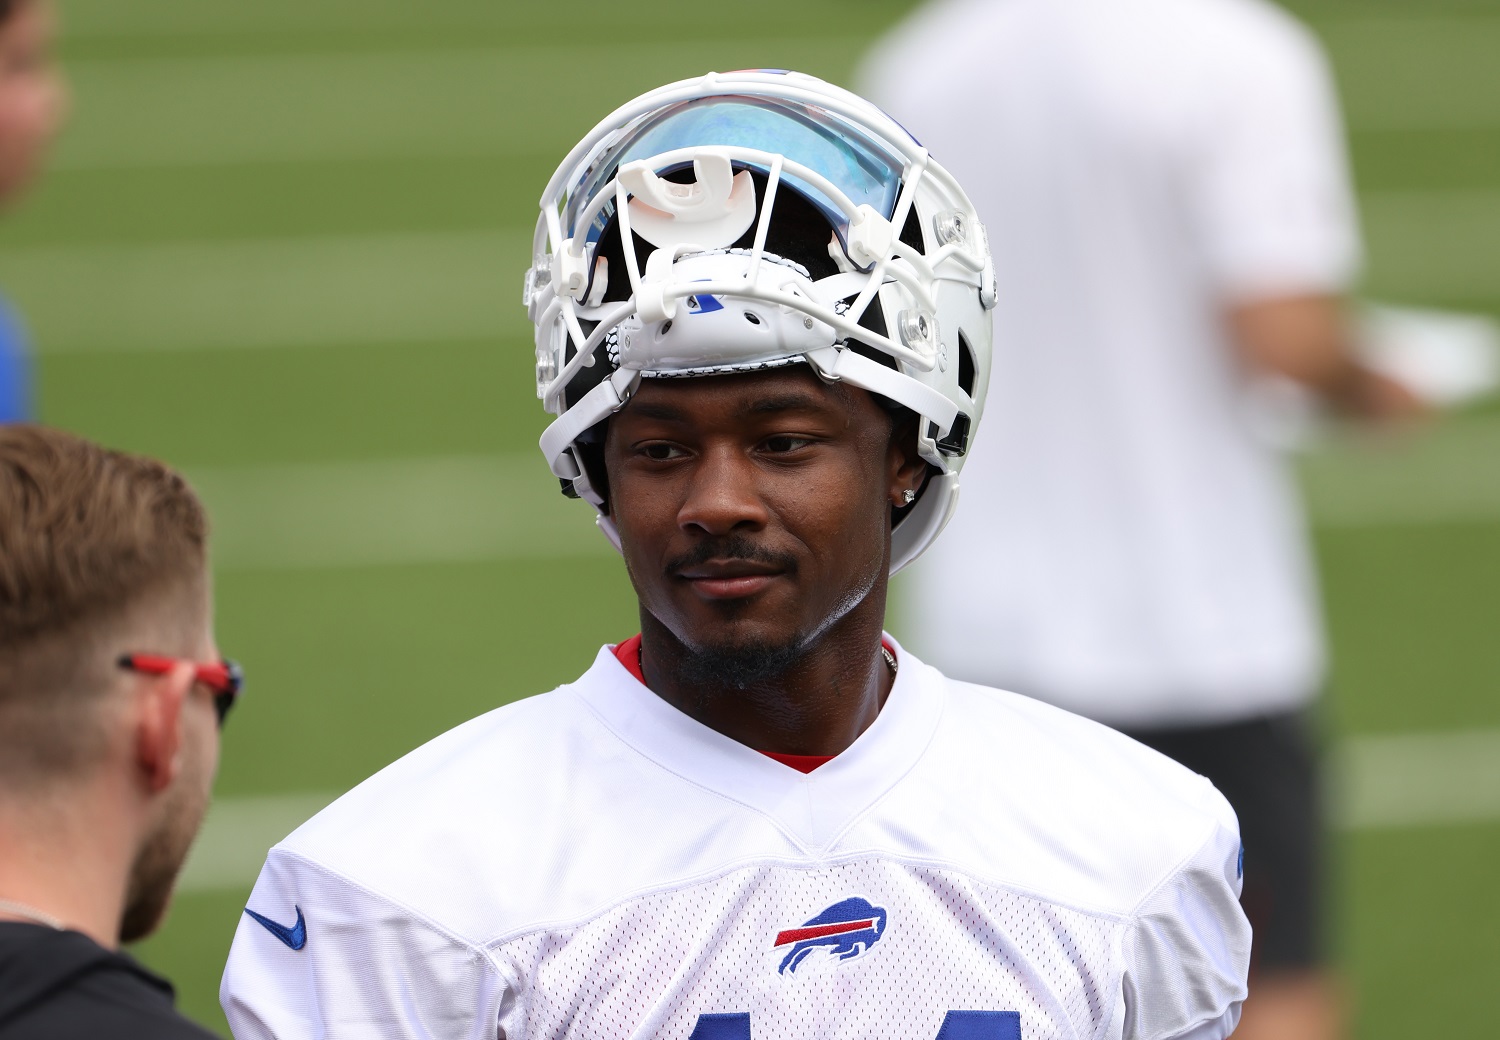 Stefon Diggs of the Buffalo Bills on the sideline during workouts at Highmark Stadium on June 2, 2021 in Orchard Park, New York. | Timothy T Ludwig/Getty Images